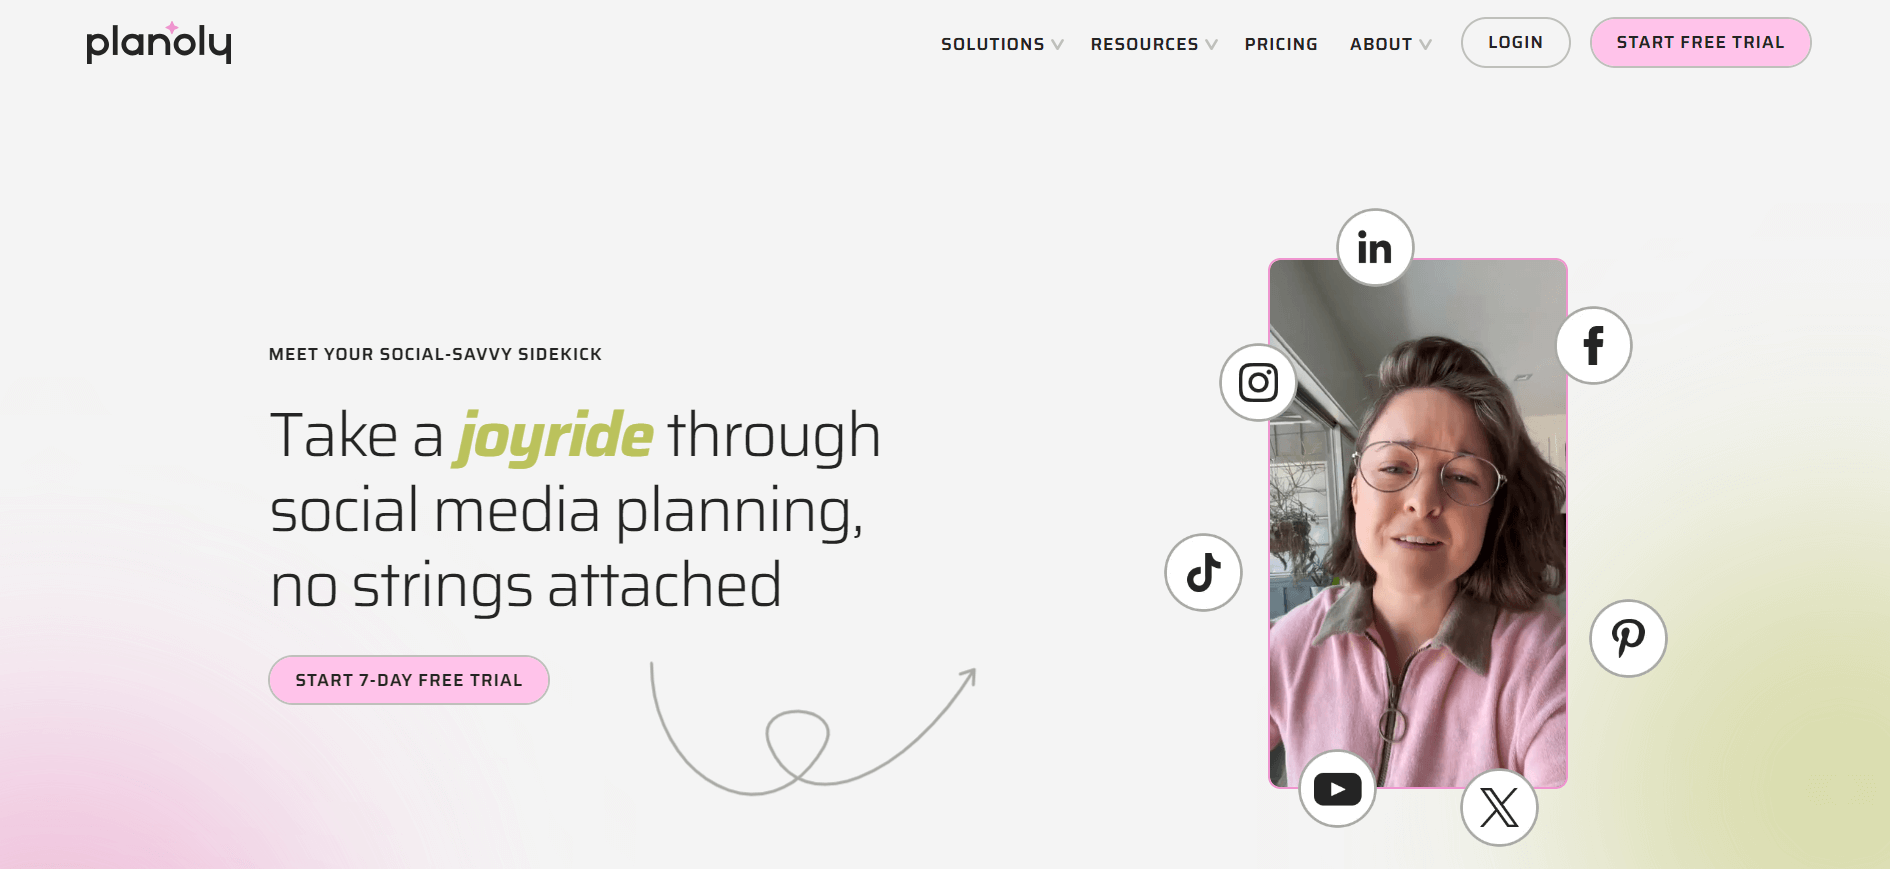 Planoly homepage inviting users to take a "joyride" through social media planning with a 7-day free trial offer.